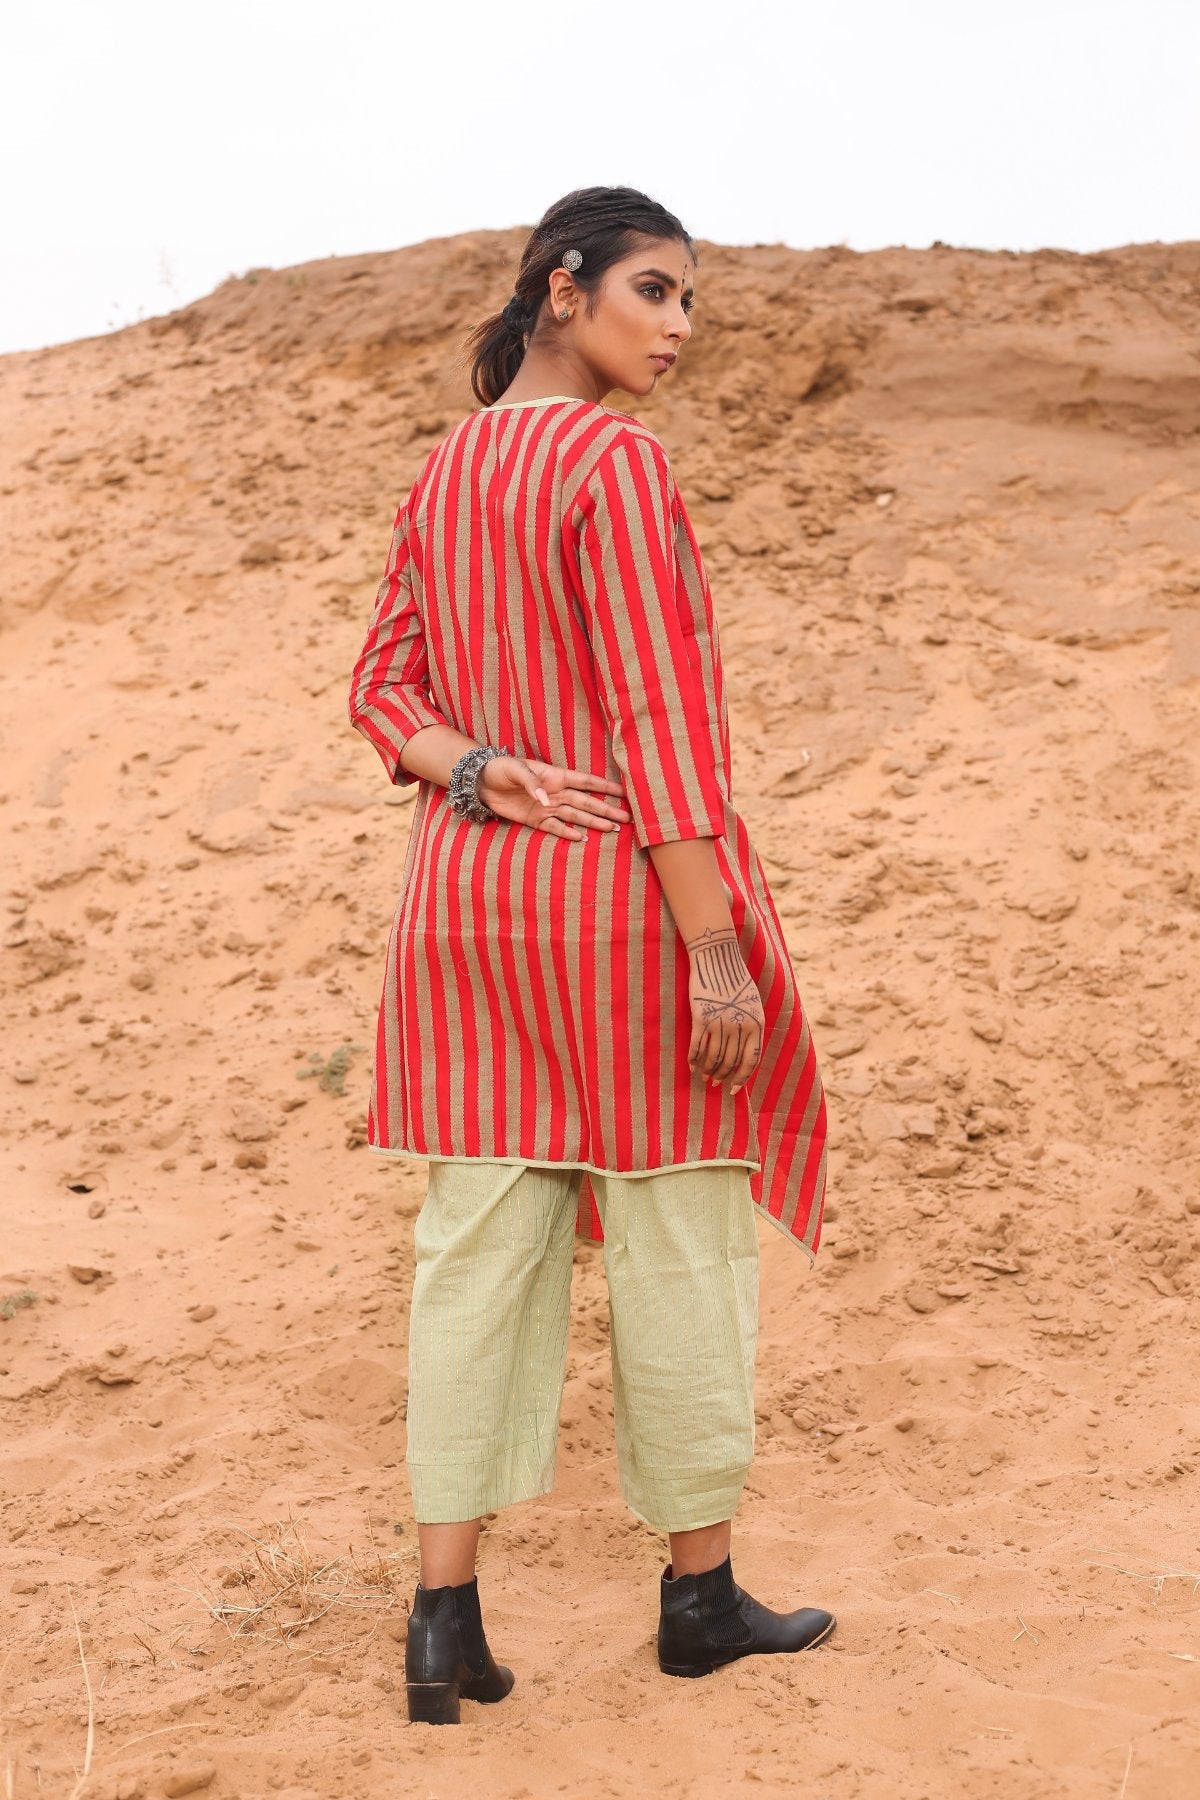 Top With Pants And Red Striped Cape - Set Of Three at Kamakhyaa by Keva. This item is Cape, Co-ord Sets, Cotton, Cotton Lurex, Desert Rose, Natural, Office Wear Co-ords, Red, Relaxed Fit, Resort Wear, Stripes, Travel, Travel Co-ords, Womenswear